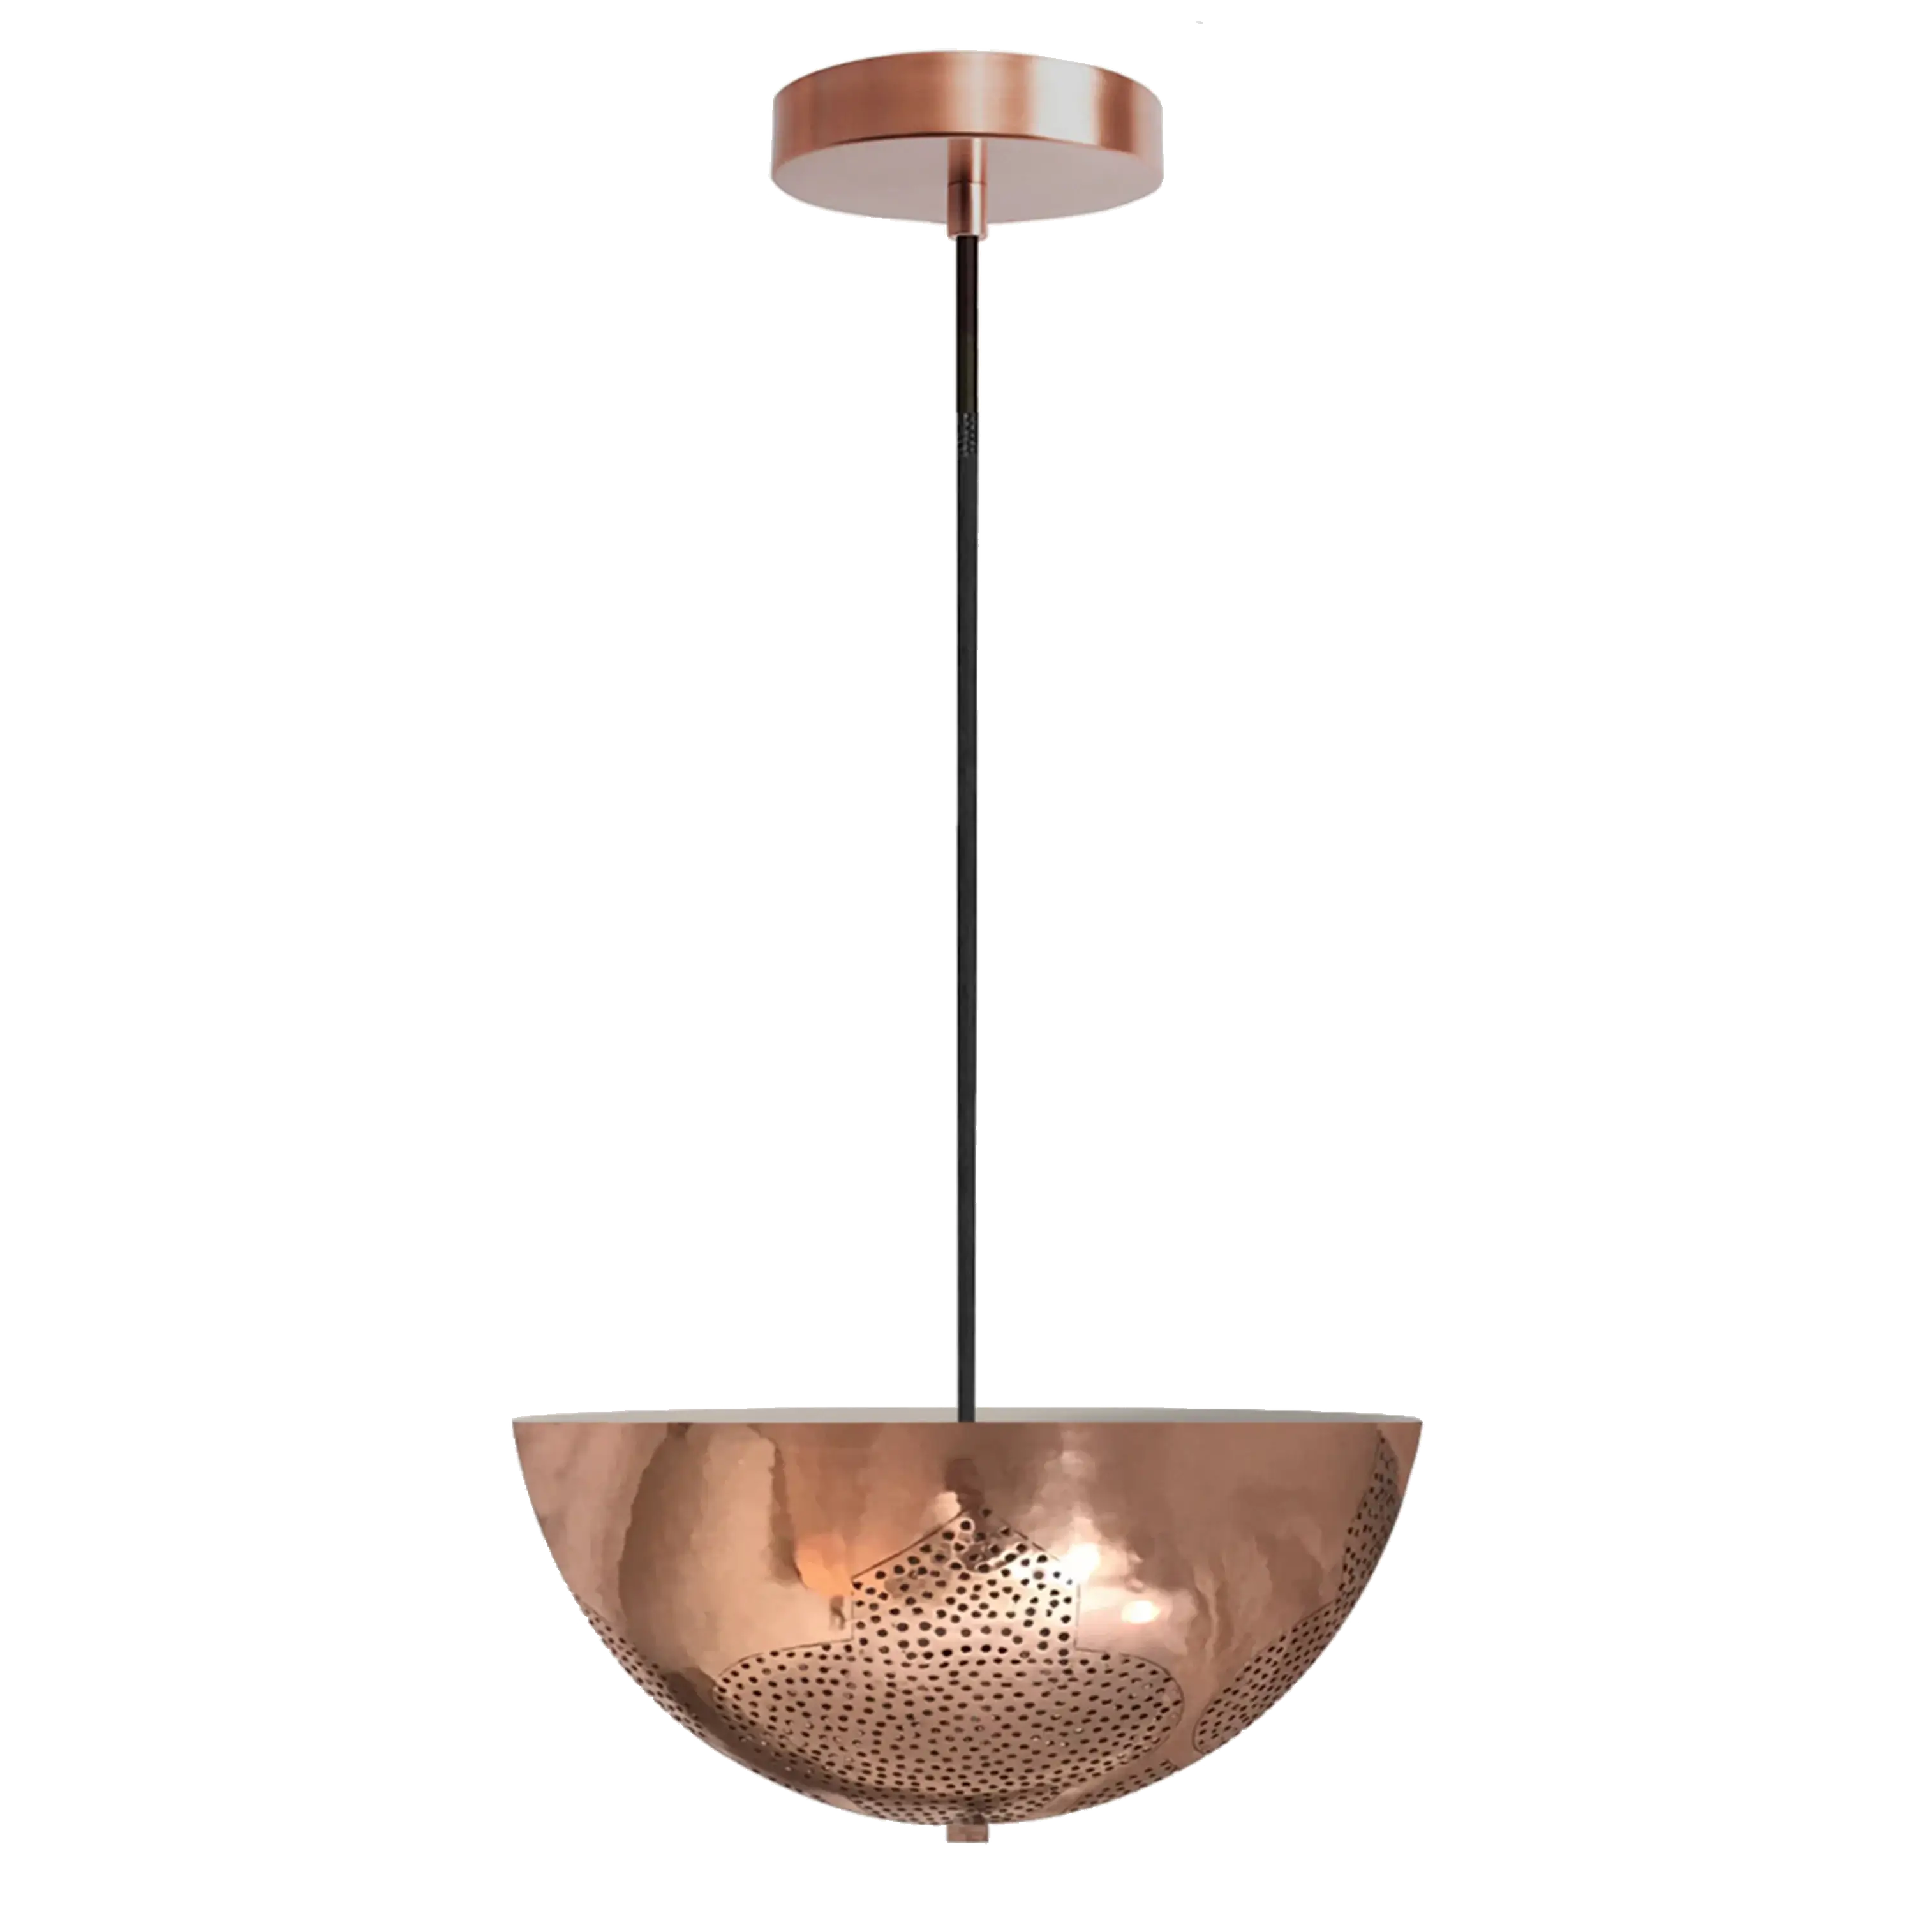 Dounia home Pendant light in polished copper  made of Metal, Model: Najma dome